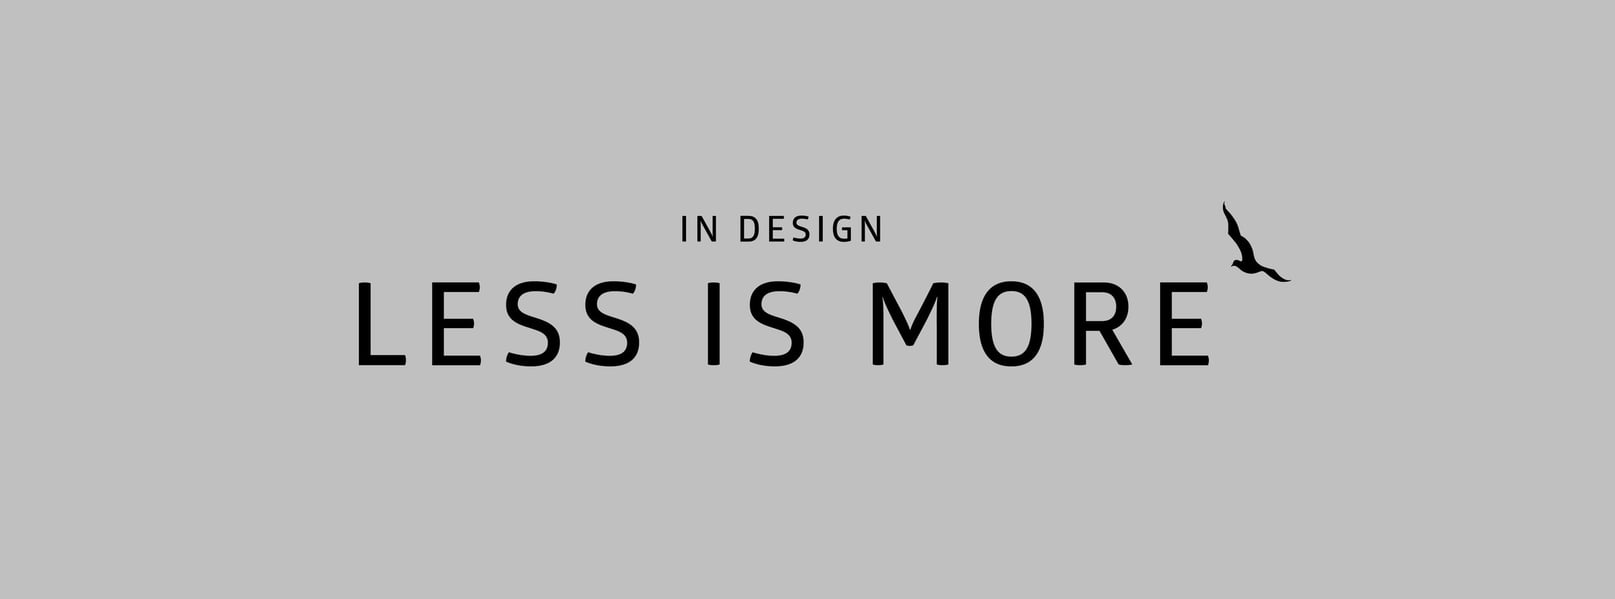 less is more in design